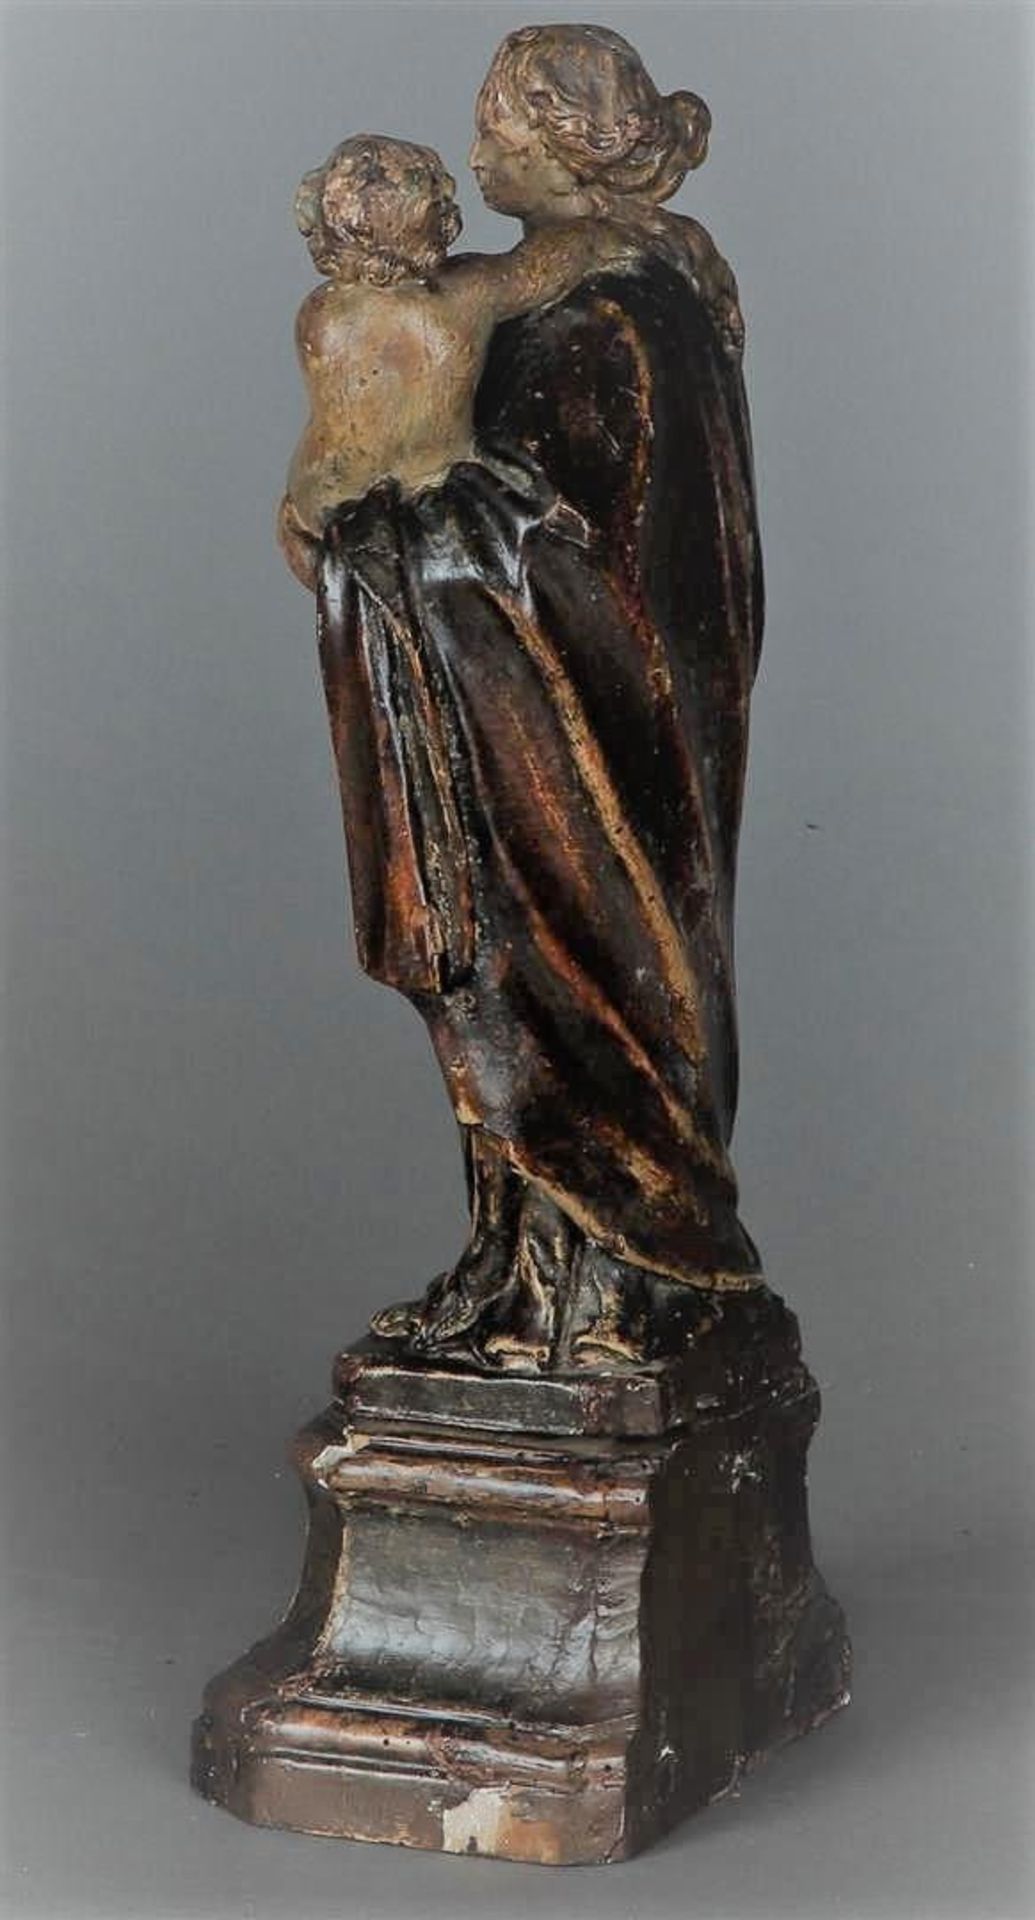 A wooden polychrome statue, Madonna with child. Possibly Antwerp 17th/18th century. - Image 3 of 3